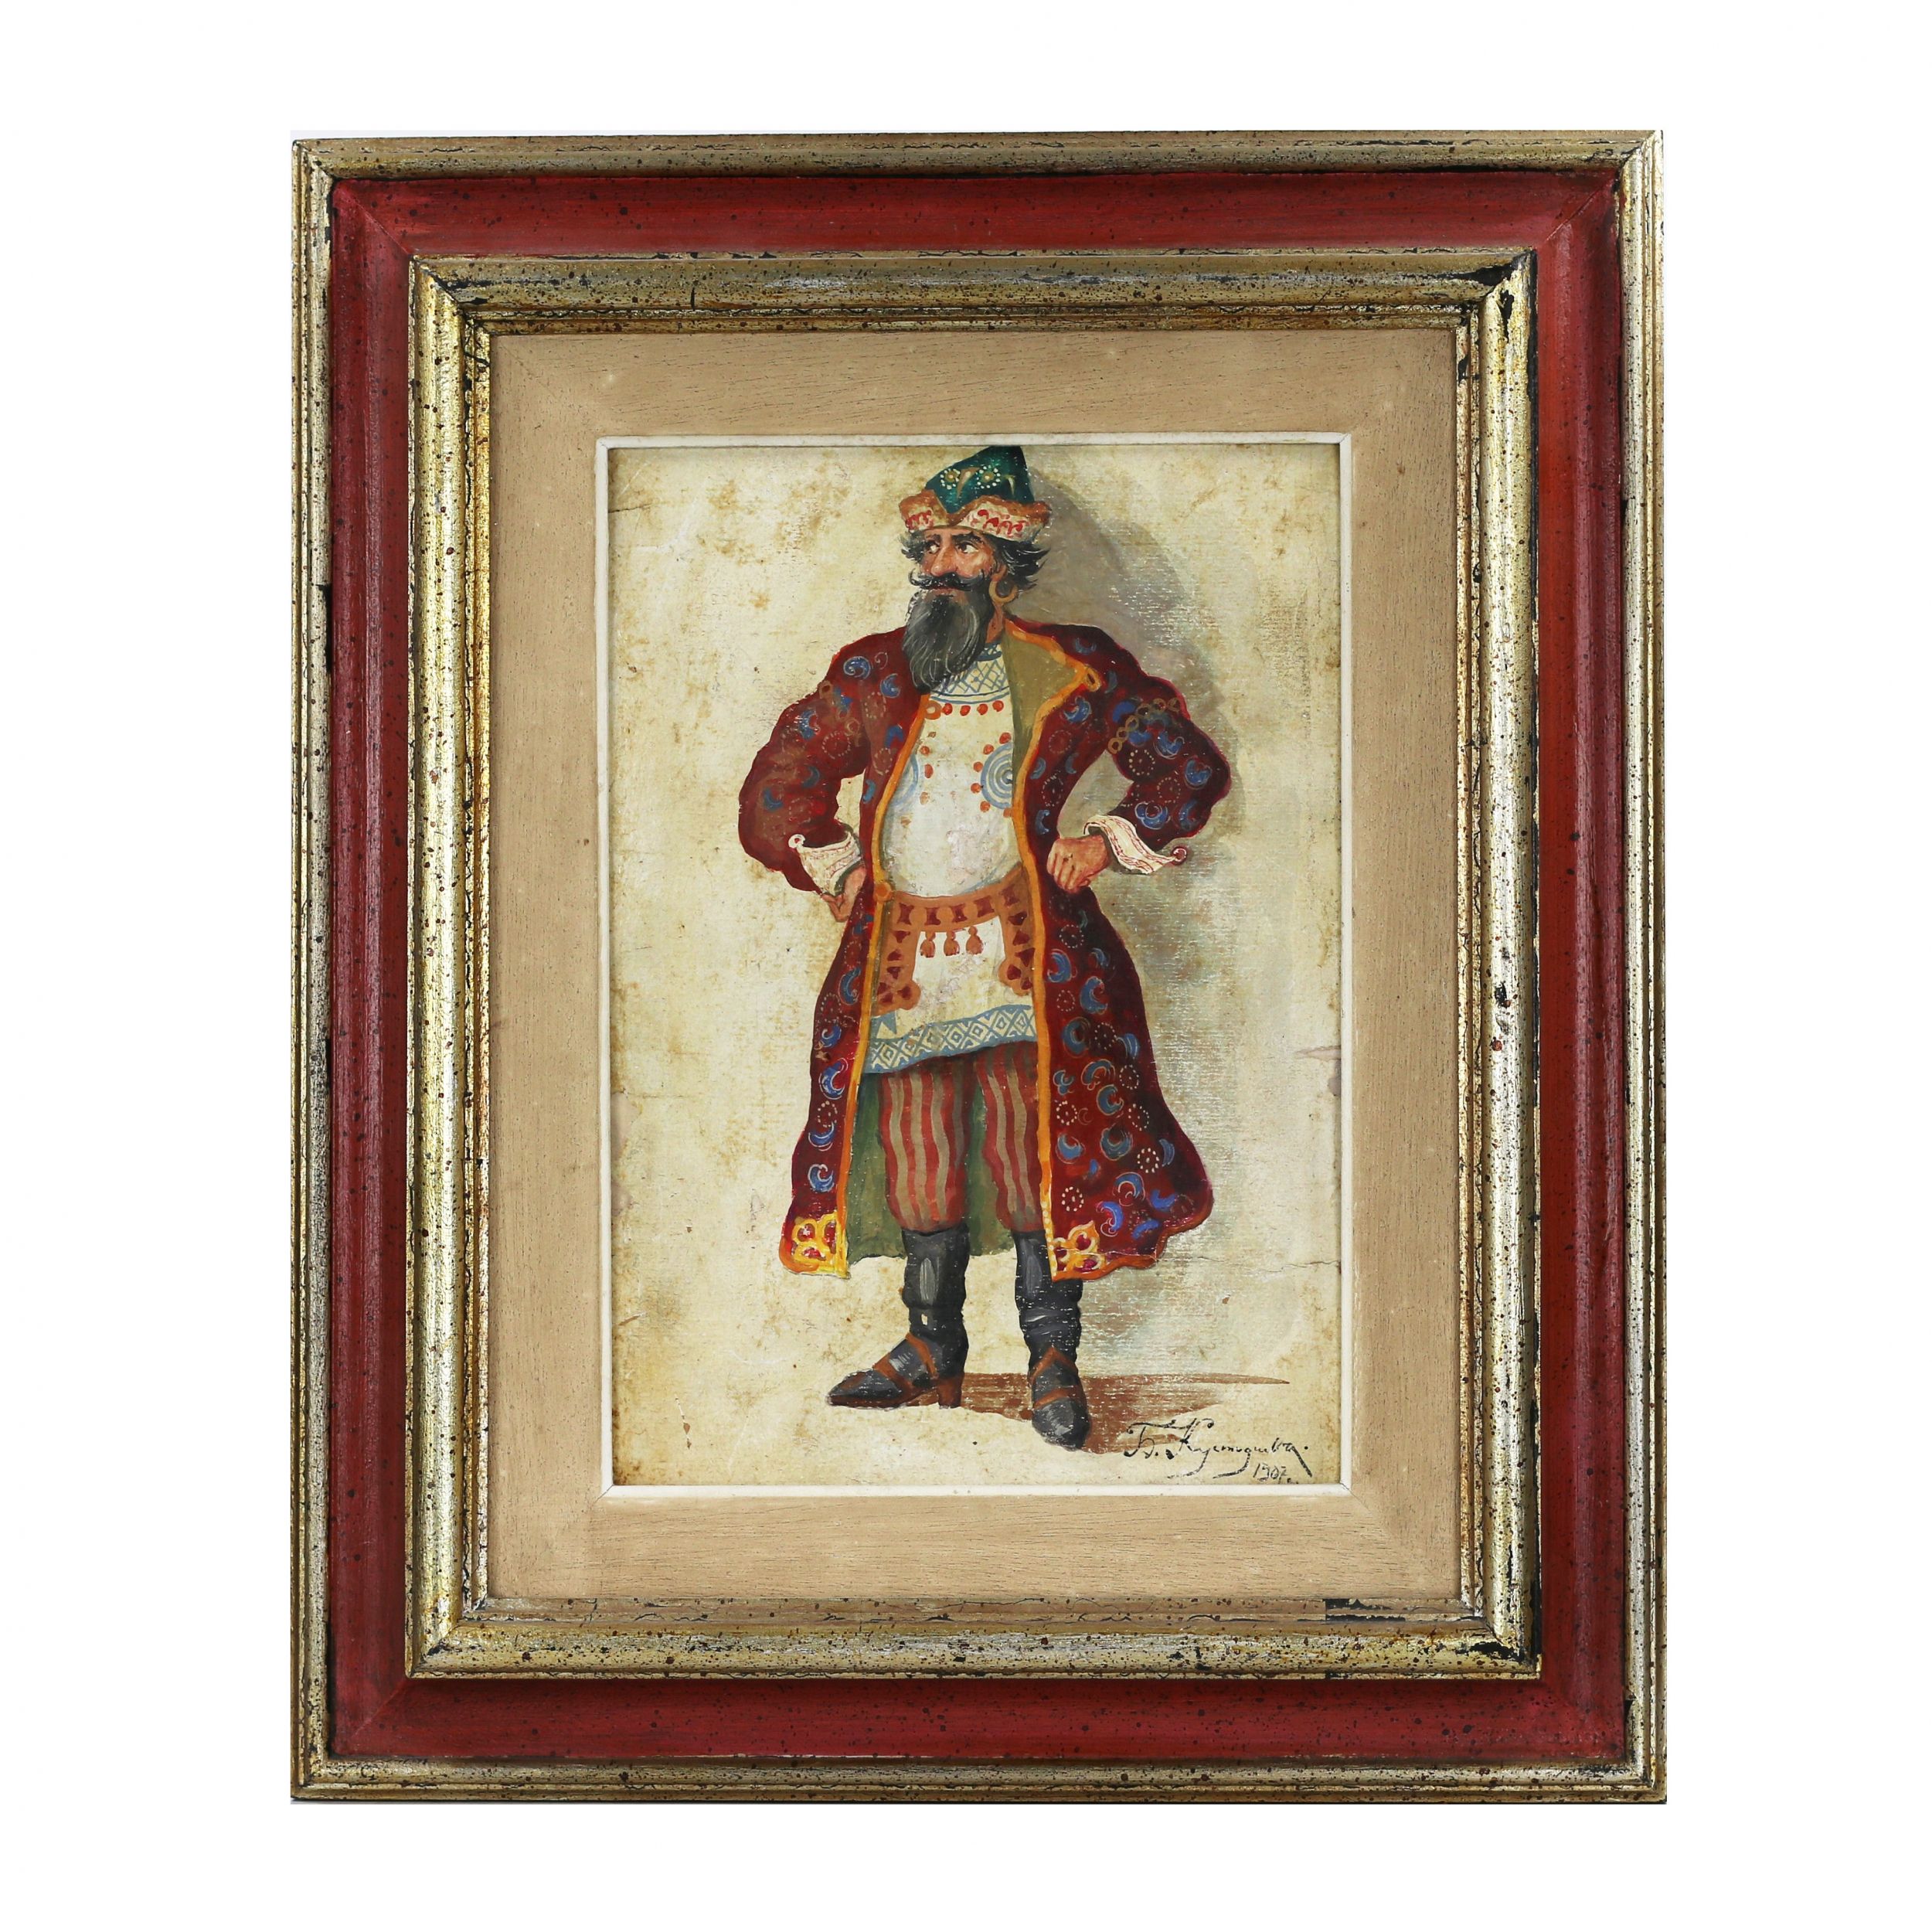 Theatrical-costume-sketch-Russian-merchant-of-the-17th-century-